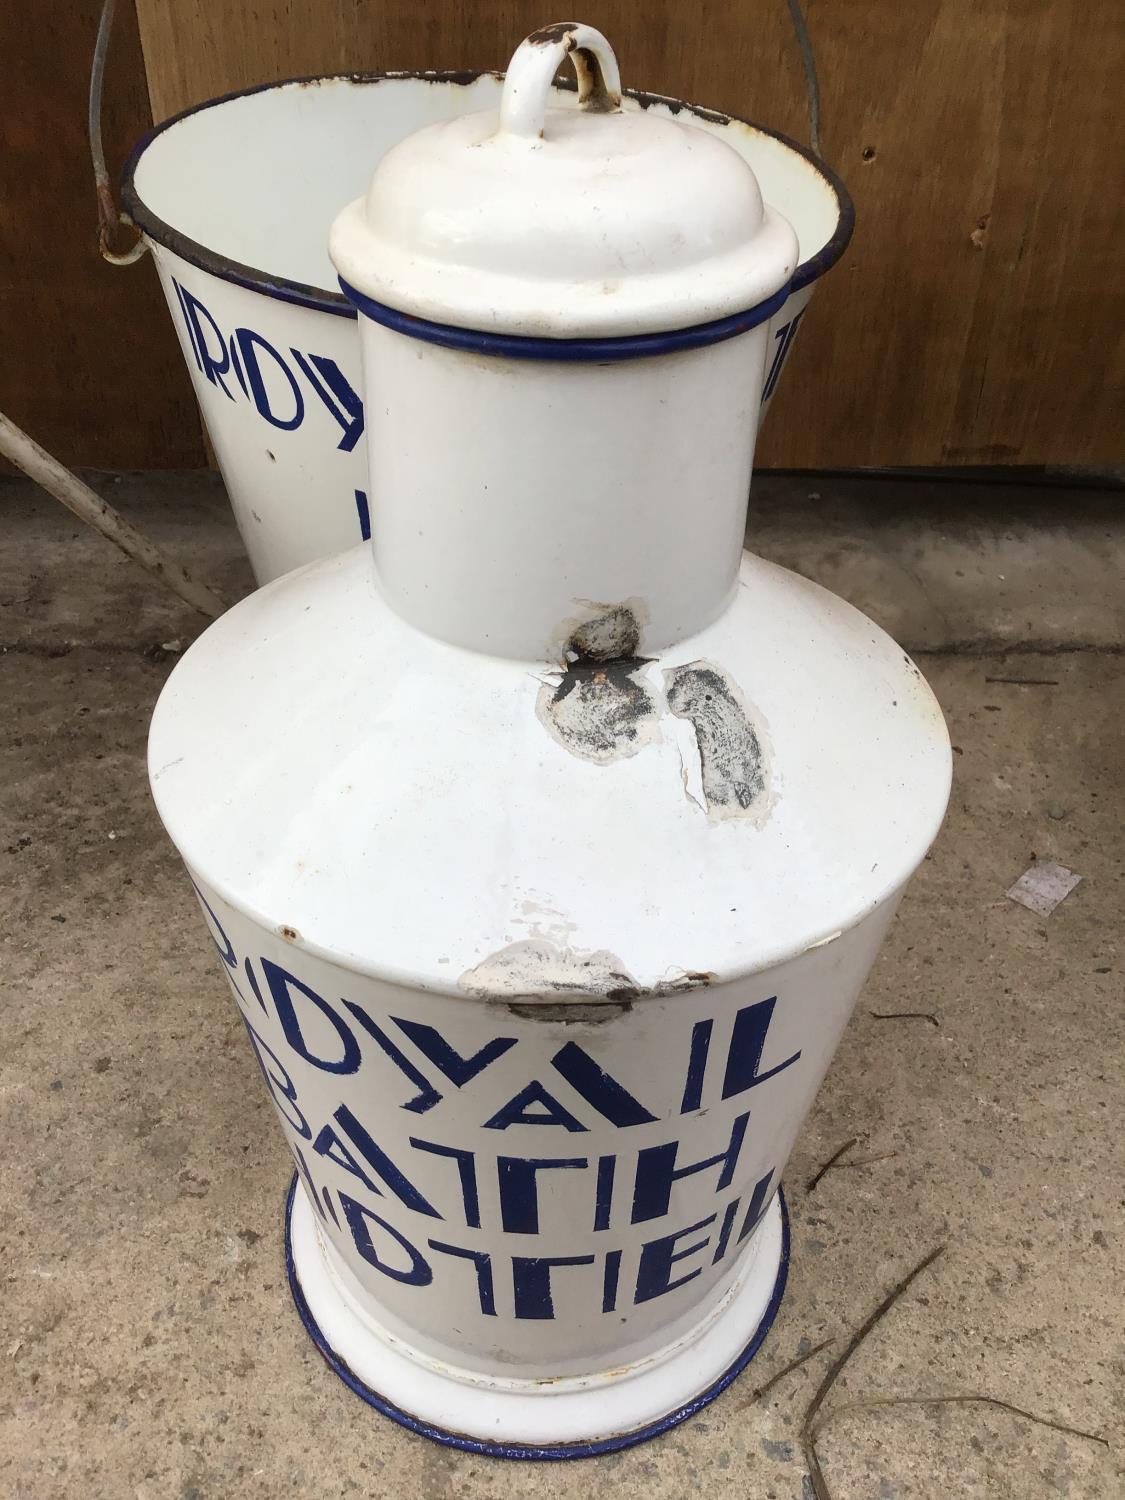 A VINTAGE 'ROYAL BATH HOTEL' WHITE AND BLUE ENAMEL BUCKET, LIDDED JUG, BOWL ON A STAND - Image 3 of 4